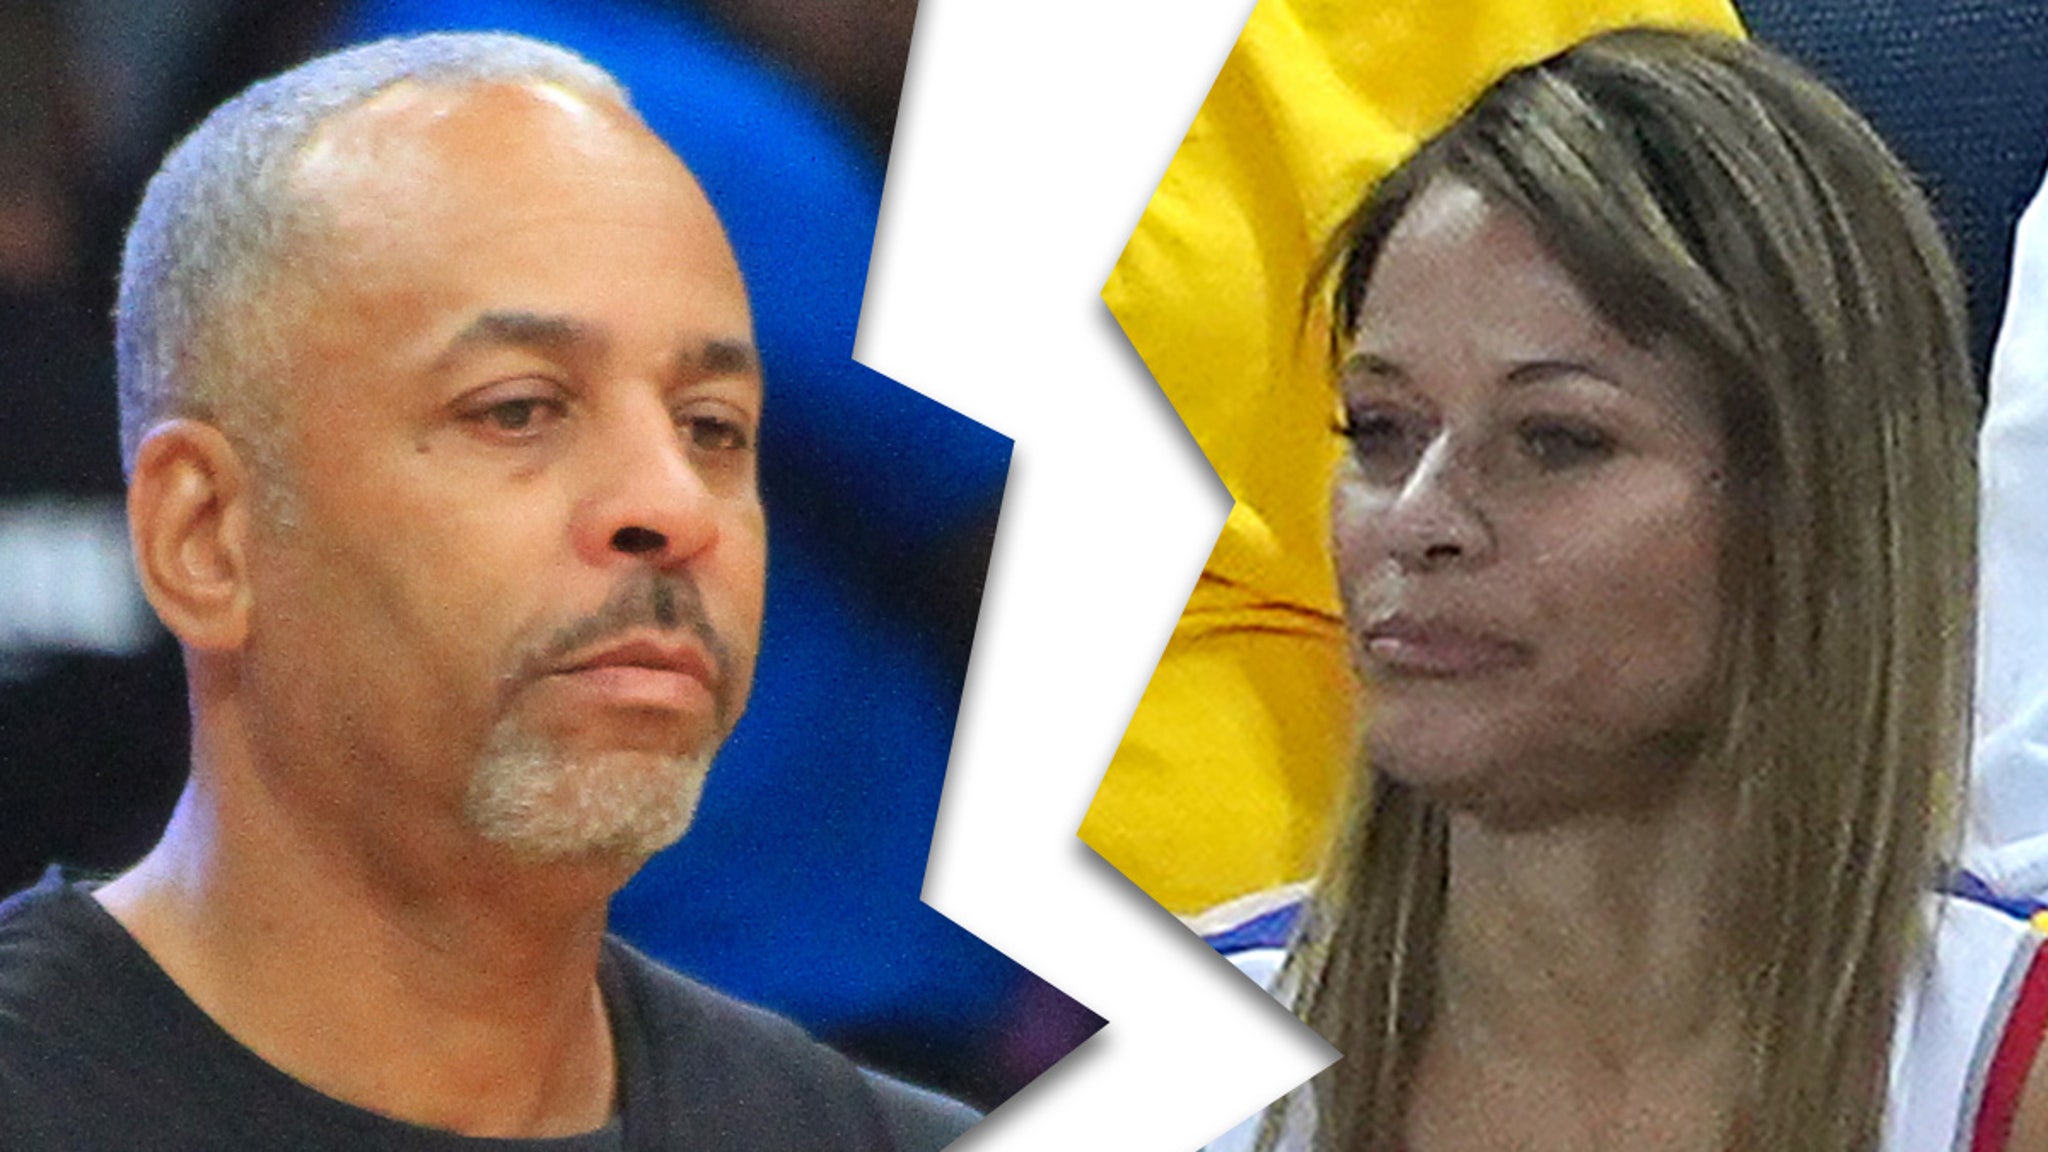 Steph Curry's Parents, Sonya and Dell, Accuse Each Other of Cheating in Divorce Docs